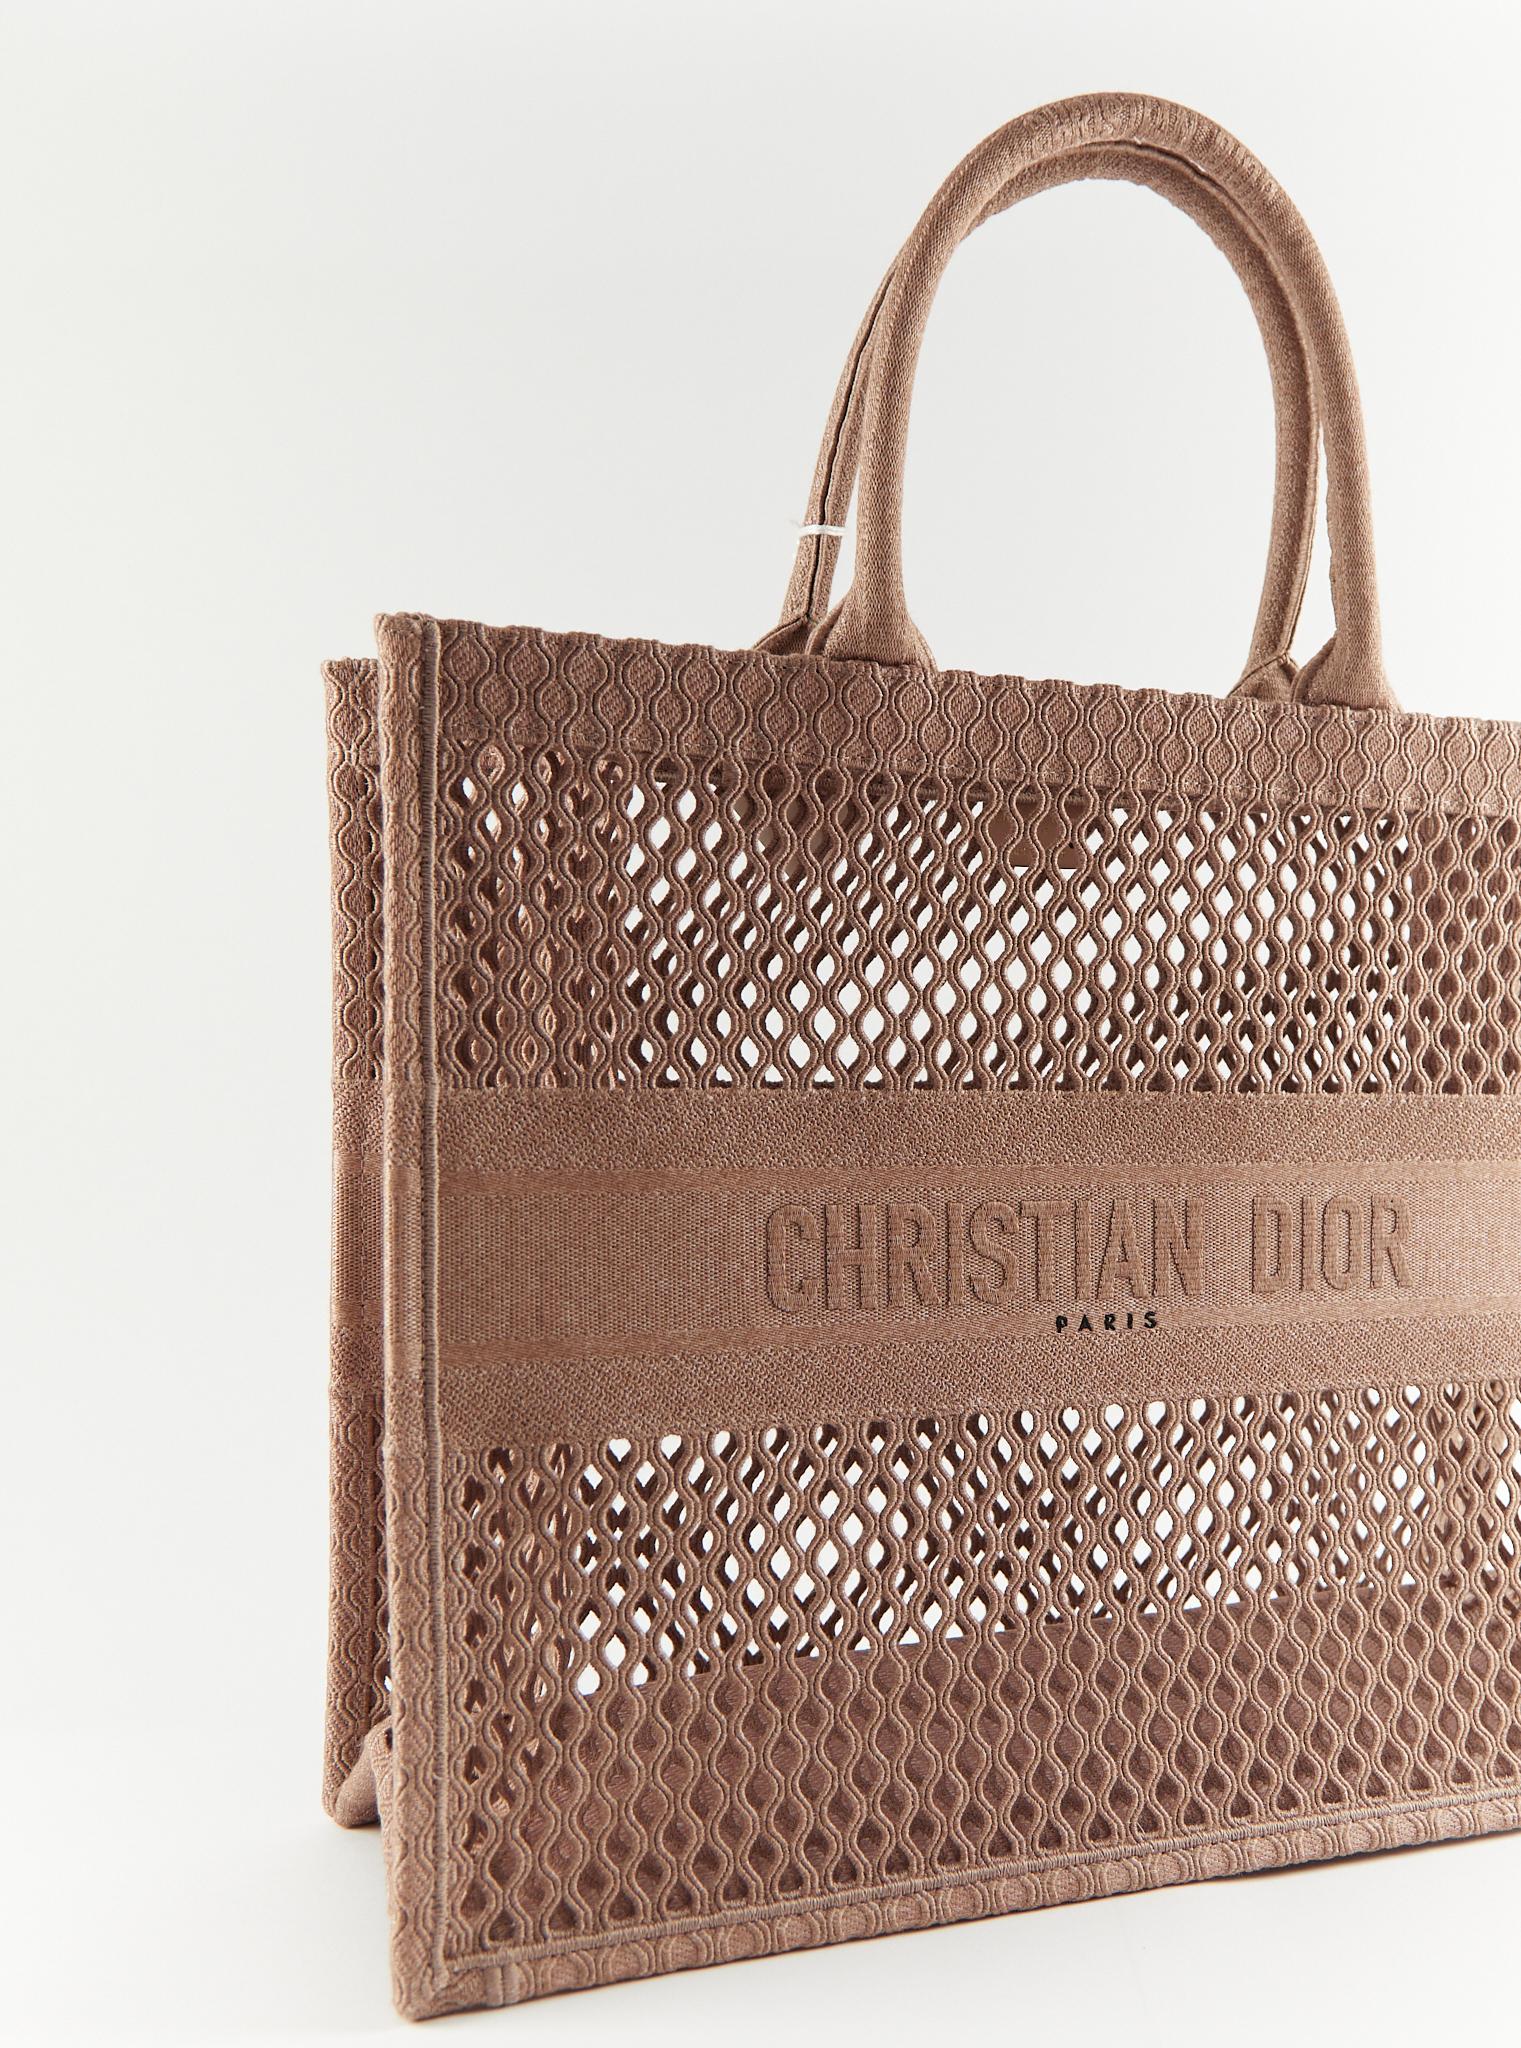 Dior Perforated Book Tote in Blush Pink 

Dimensions: W 26.5 x H 36 x 17 cm

*Comes with dustbag only